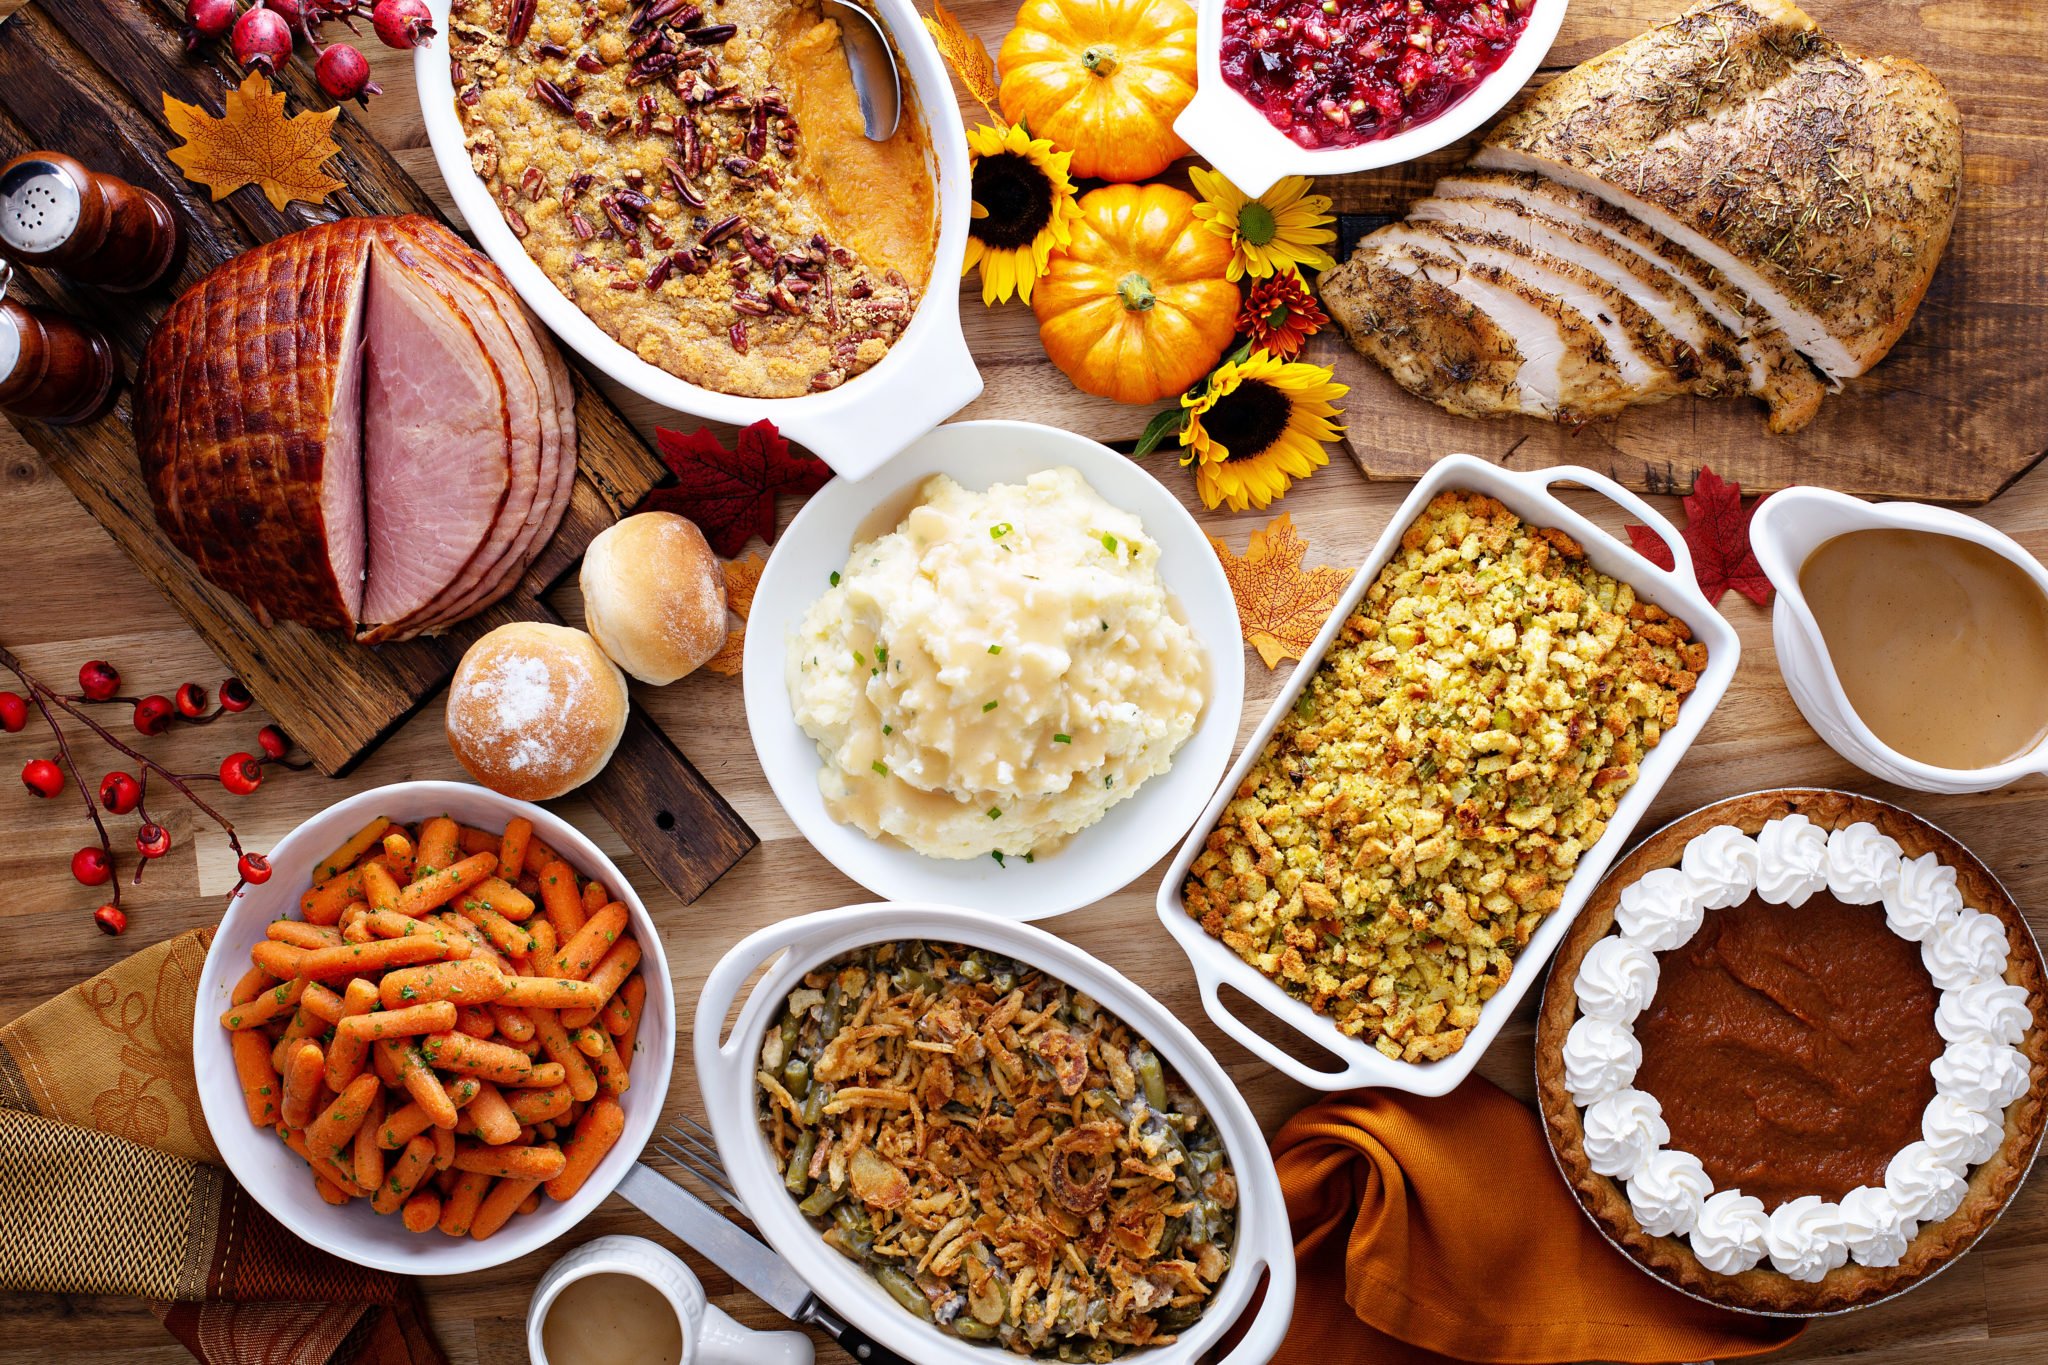 The Thanksgiving Food Scouting Report by Two Picky Eaters